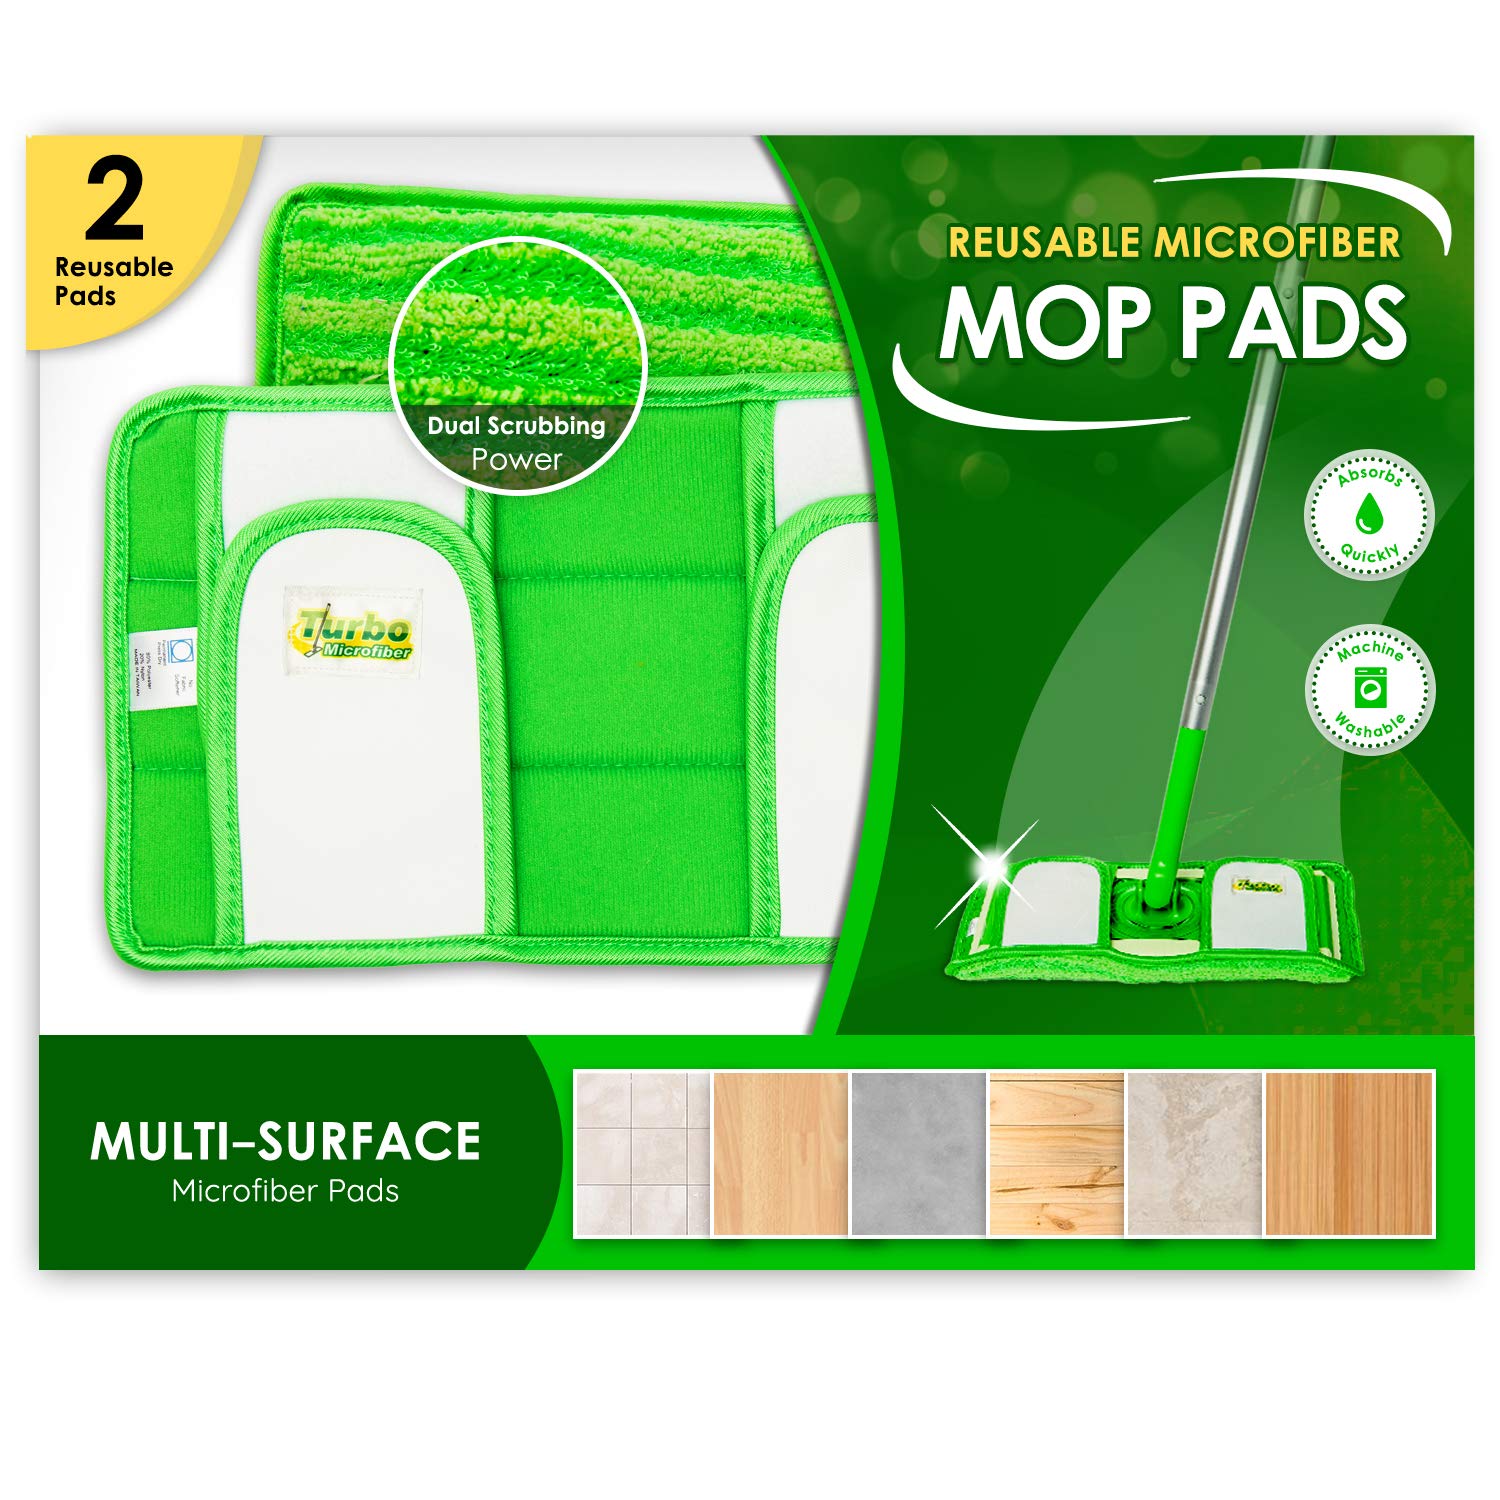 Reusable Pads Compatible with Swiffer Sweeper Mops - Washable Microfiber Mop Pad Refills by Turbo - 12 Inch Floor Cleaning Mop Head Pads Work Wet and Dry - 2 Pack